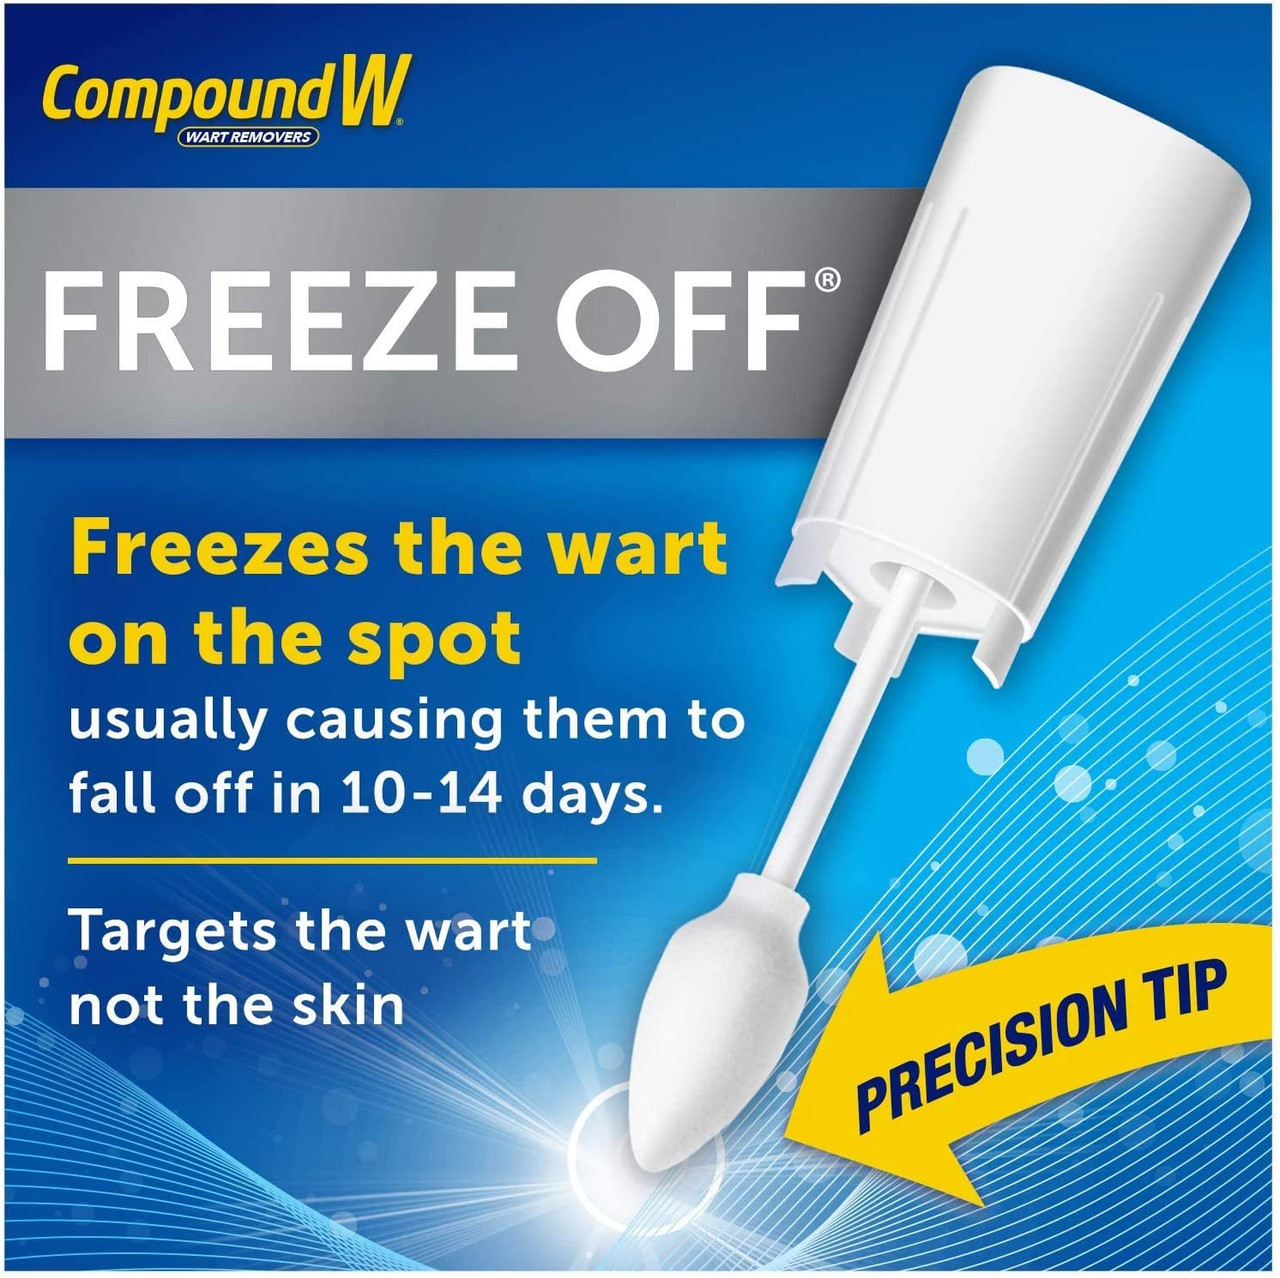 Compound W Freeze Off Plantar Wart Removal System - 8ct